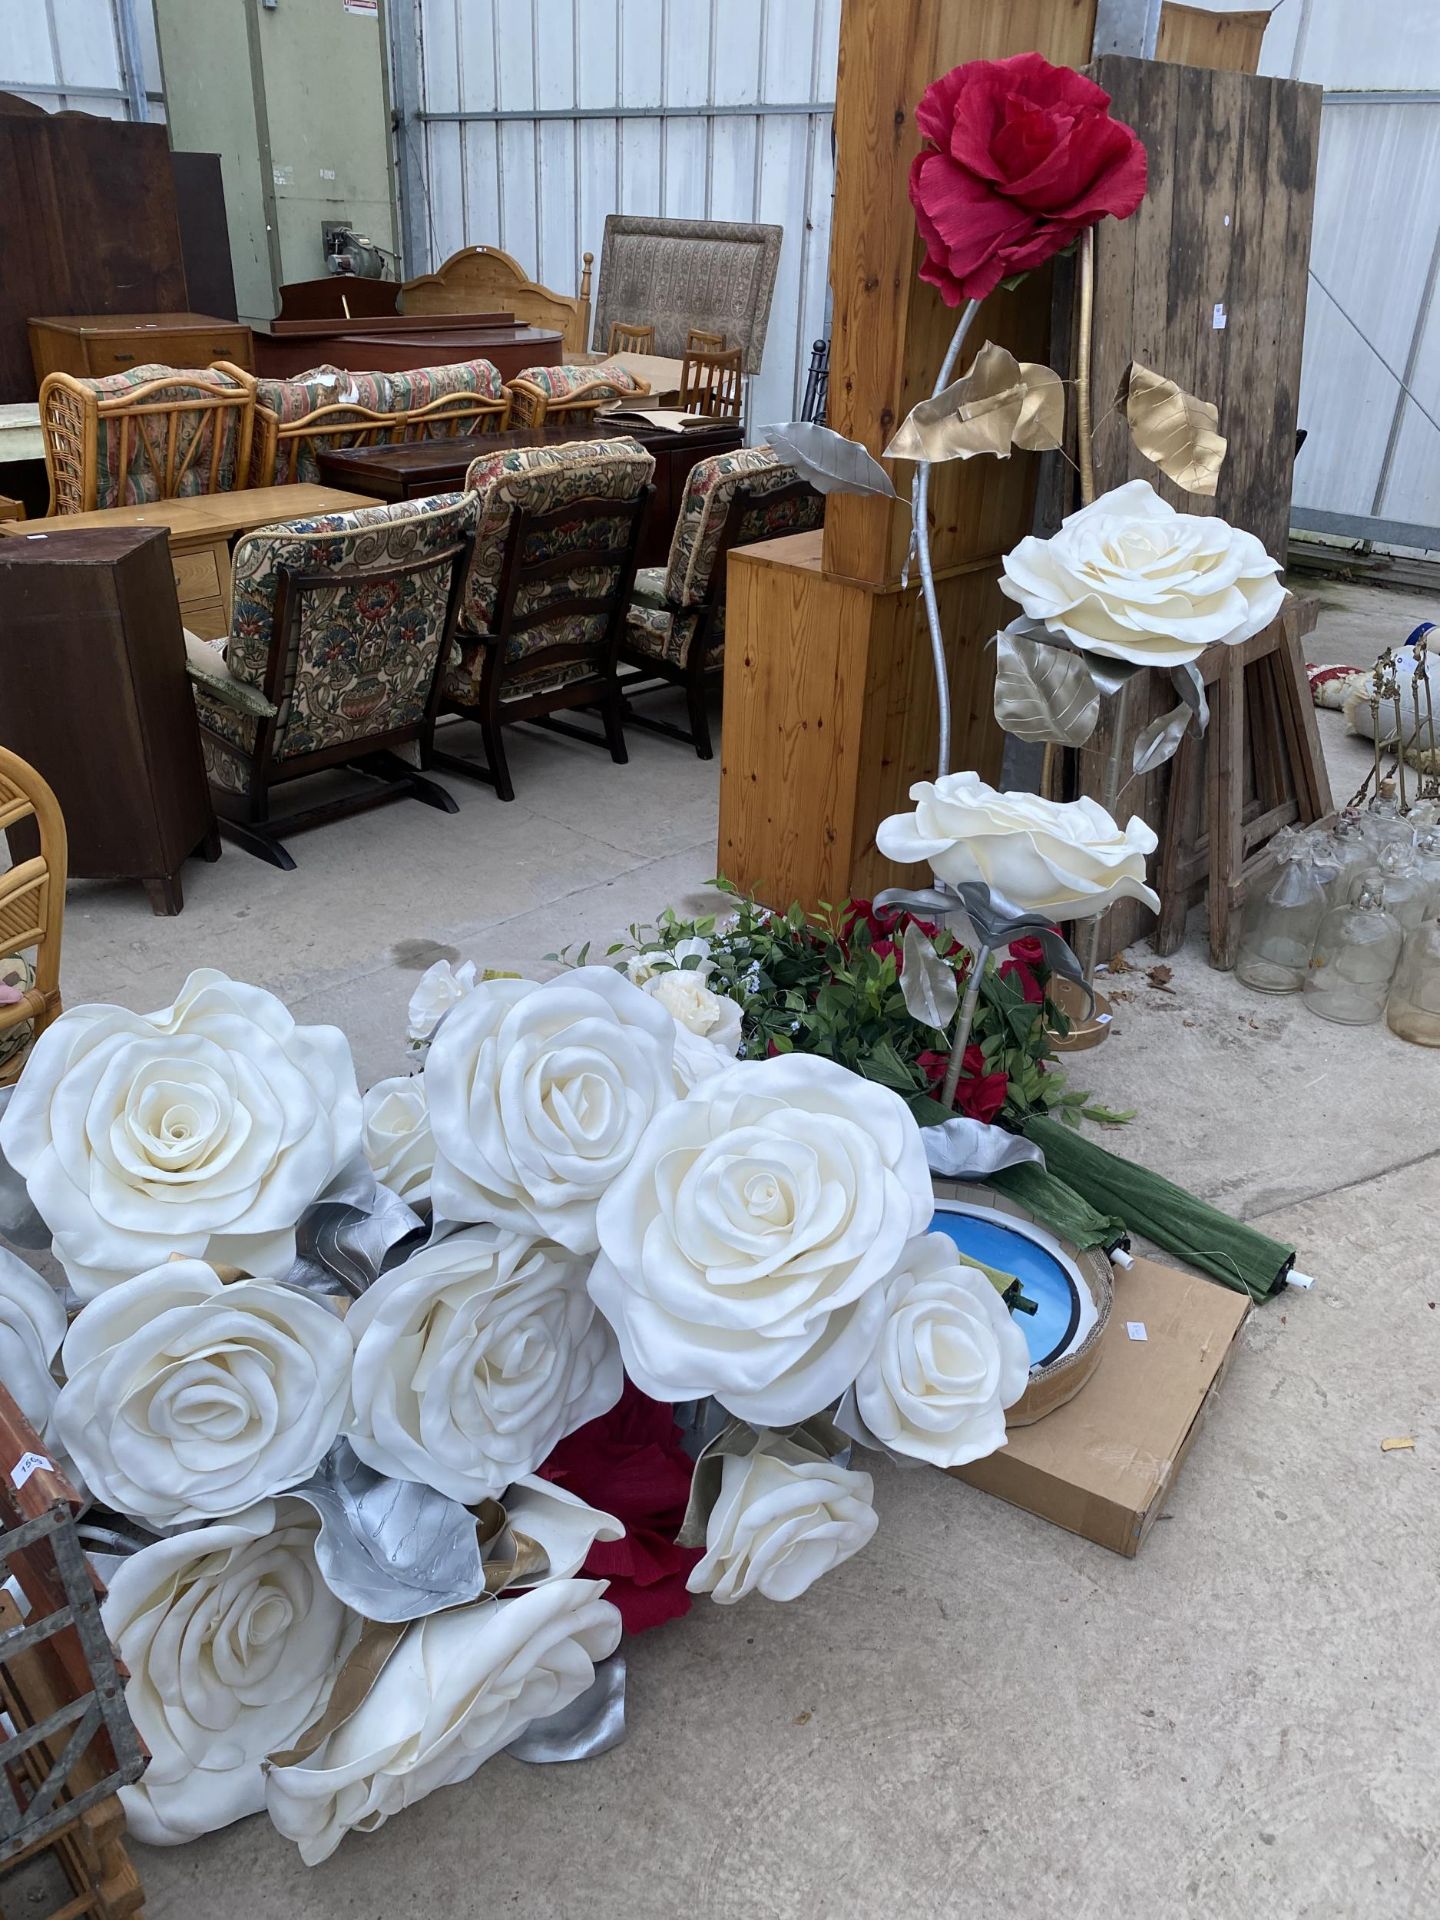 A LARGE QUANTITY OF ARTIFICIAL WEDDING FLOWERS AND DECORATIONS